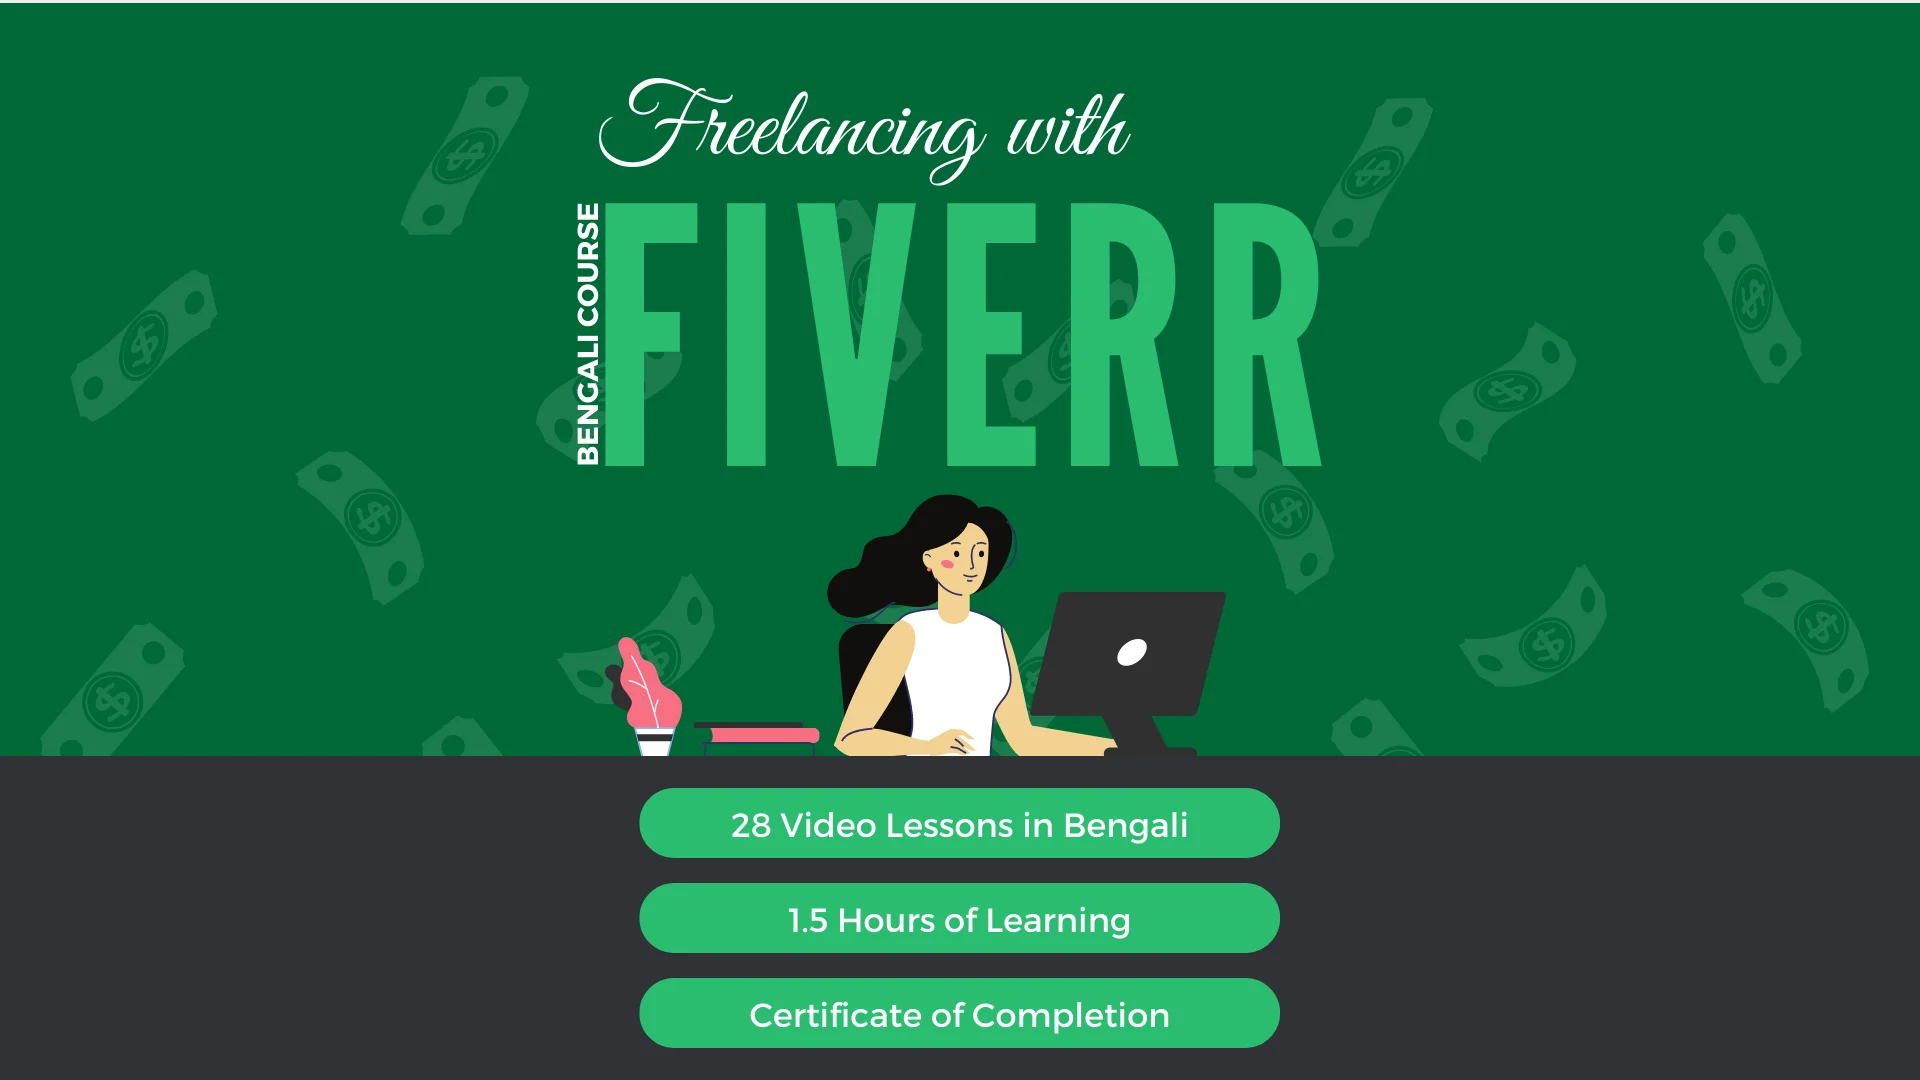 Freelancing with Fiverr Course Image